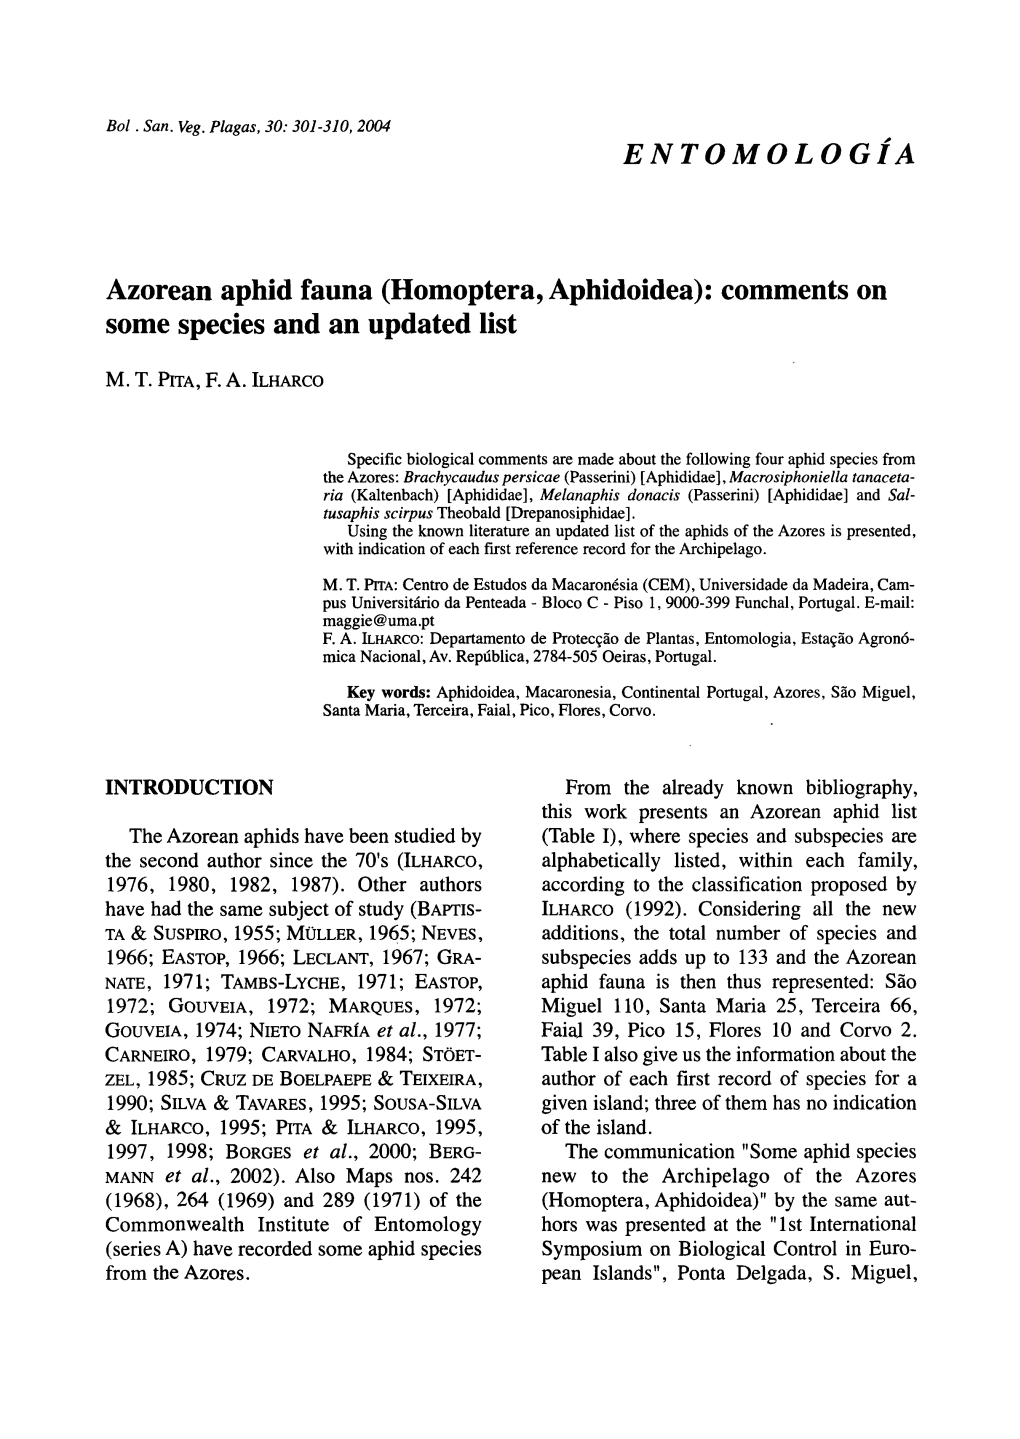 Azorean Aphid Fauna (Homoptera, Aphidoidea): Comments on Some Species and an Updated List